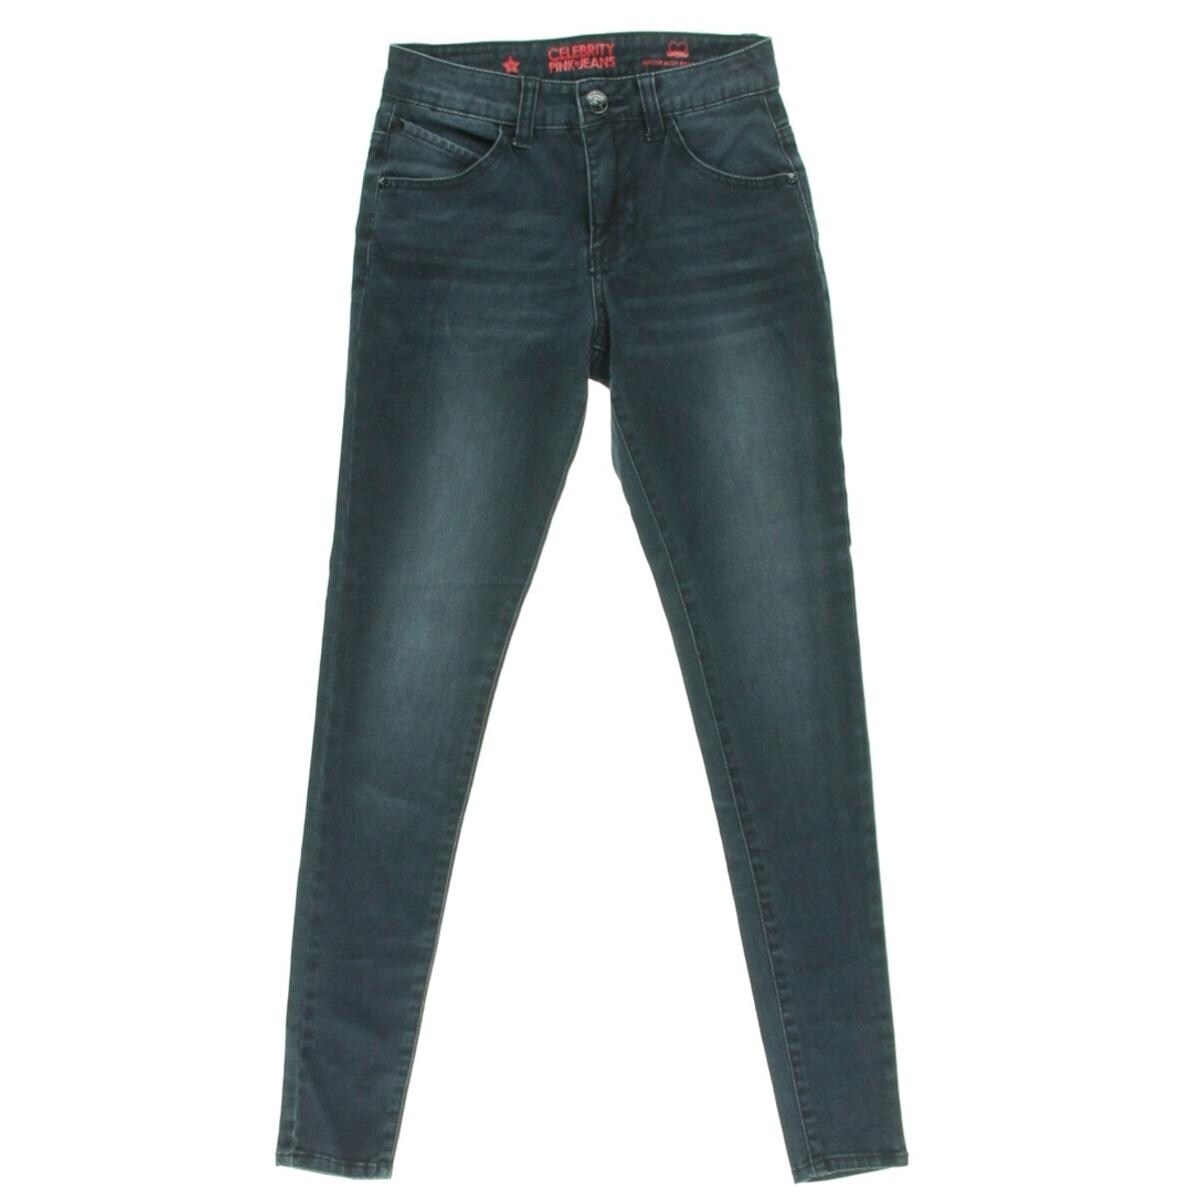 hipster skinny jeans womens